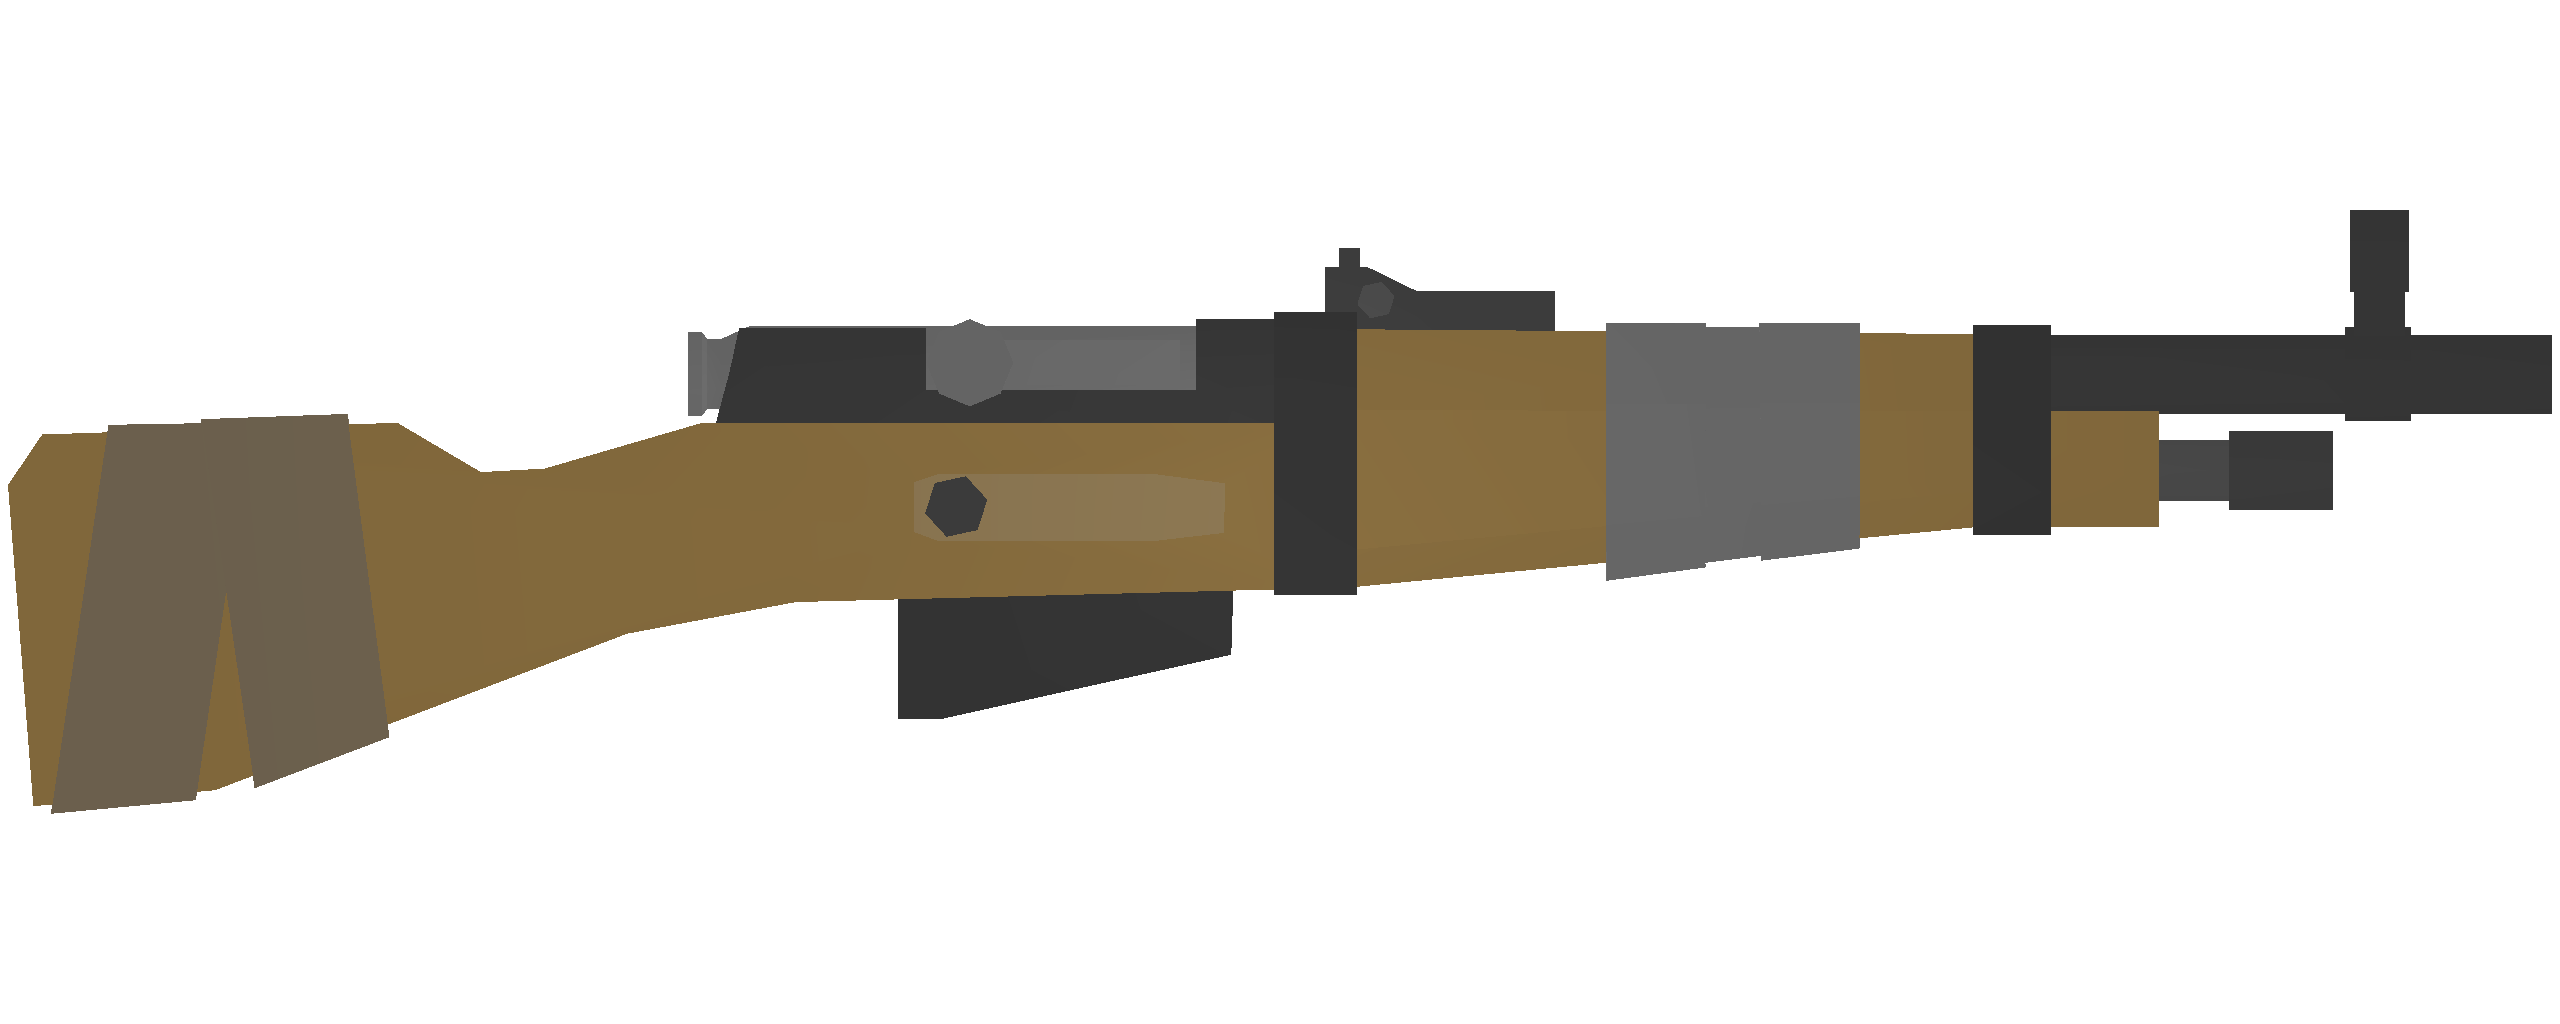 Unturned - Kuwait Items Redux + ID List for Magazines and Attachments - Sniper Rifles - 84900C6